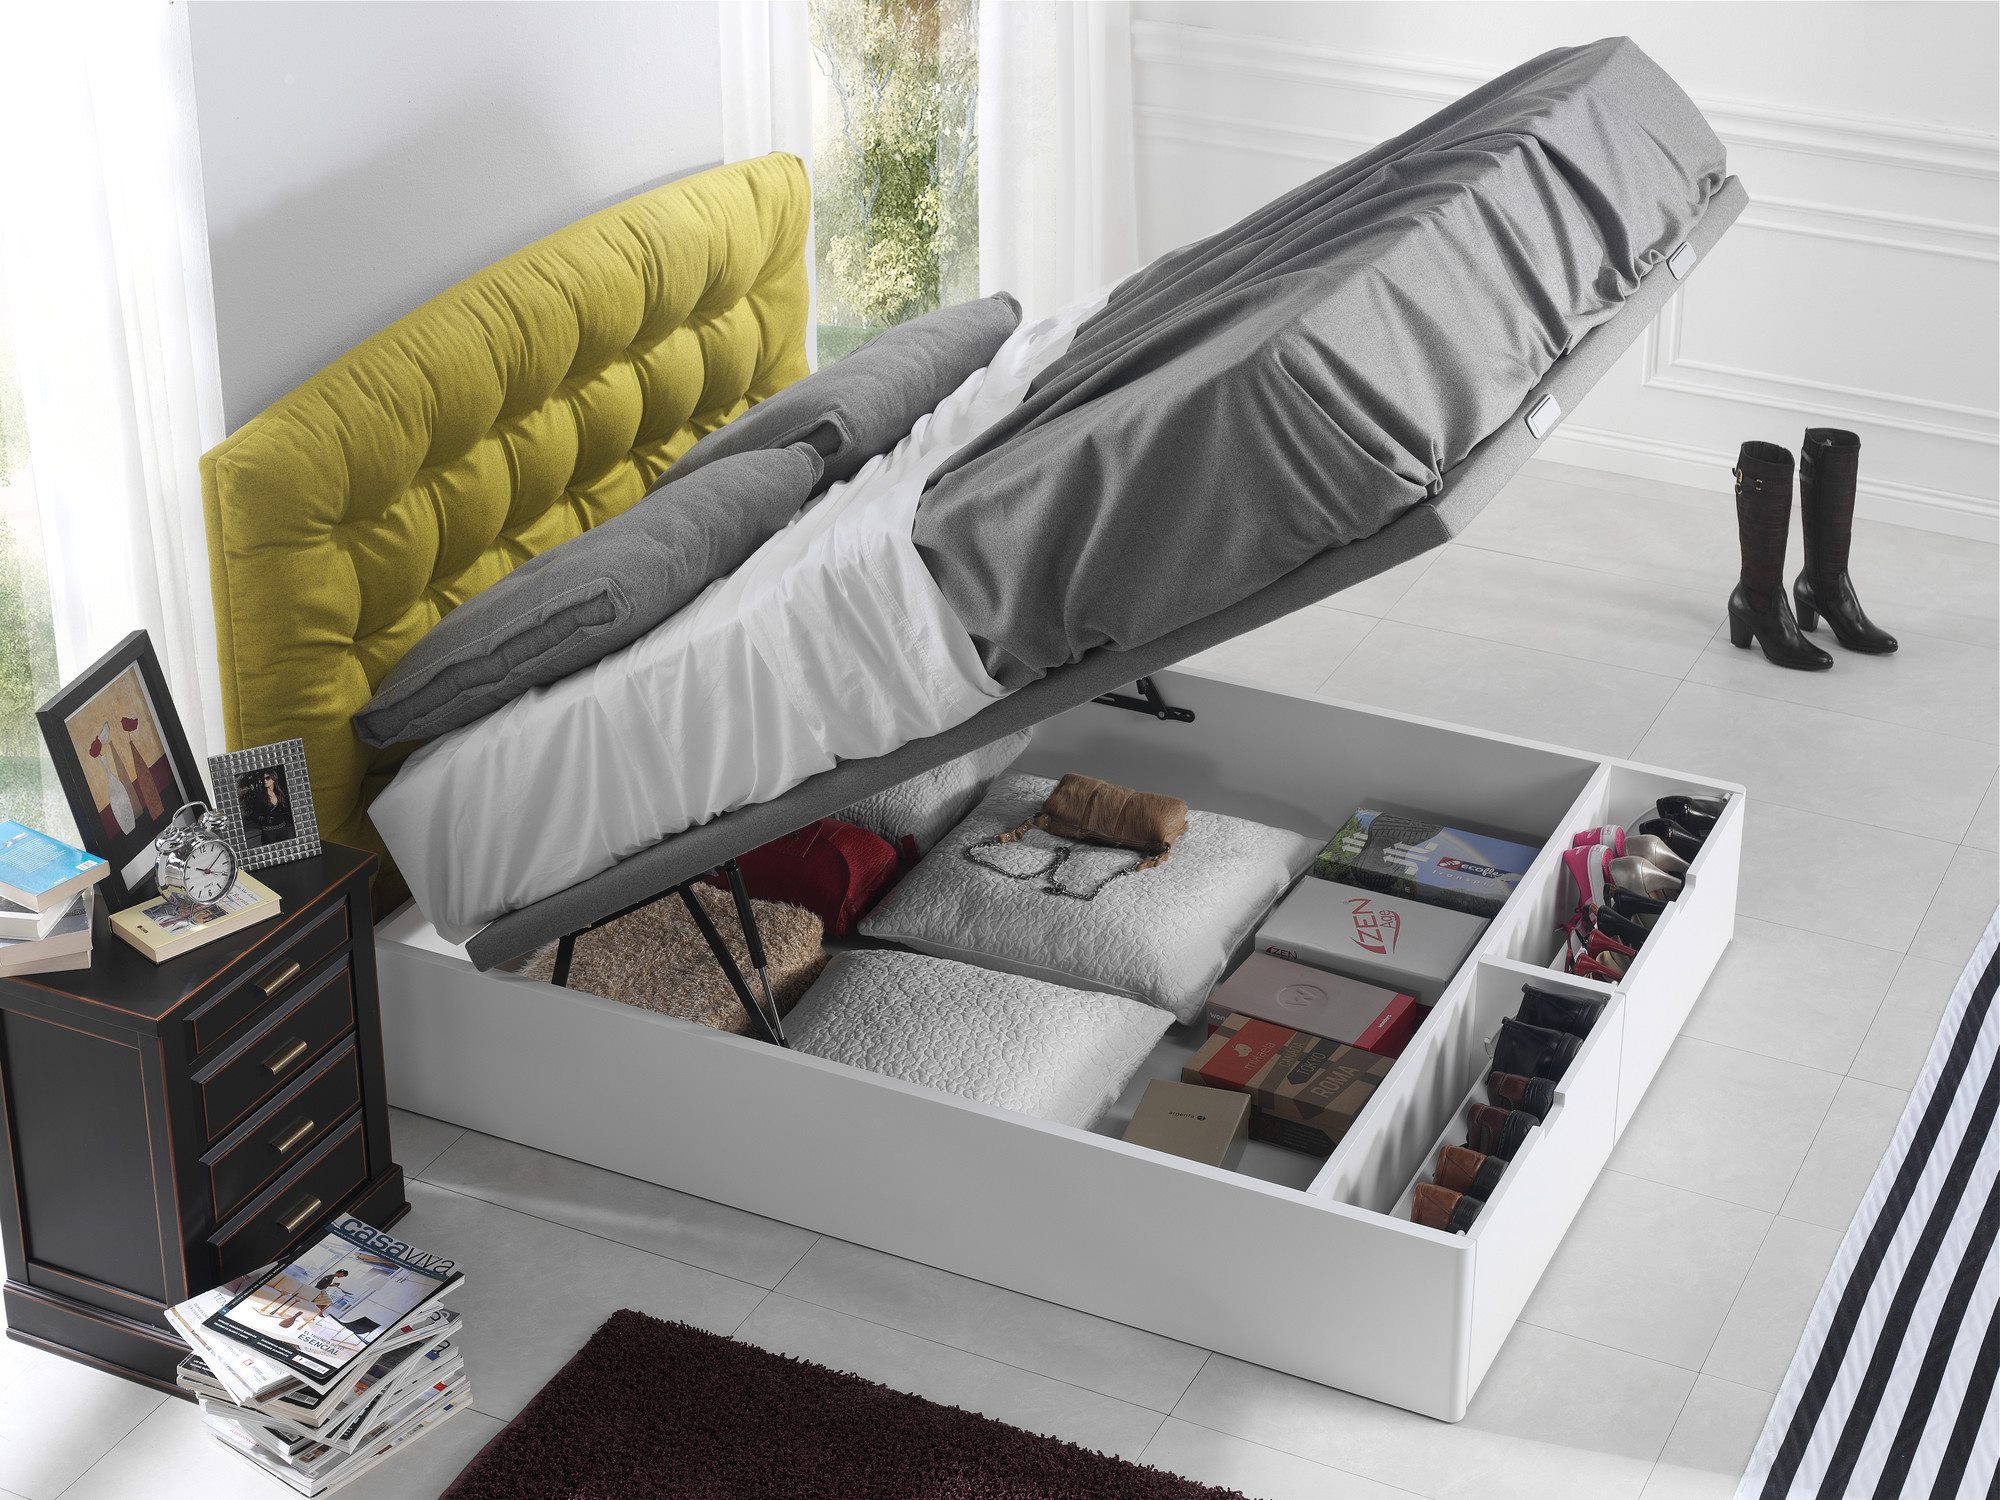 CORAL storage bed & DAYTONA headboard, ECUS: turn your bed into a mini closet to store anything you want.